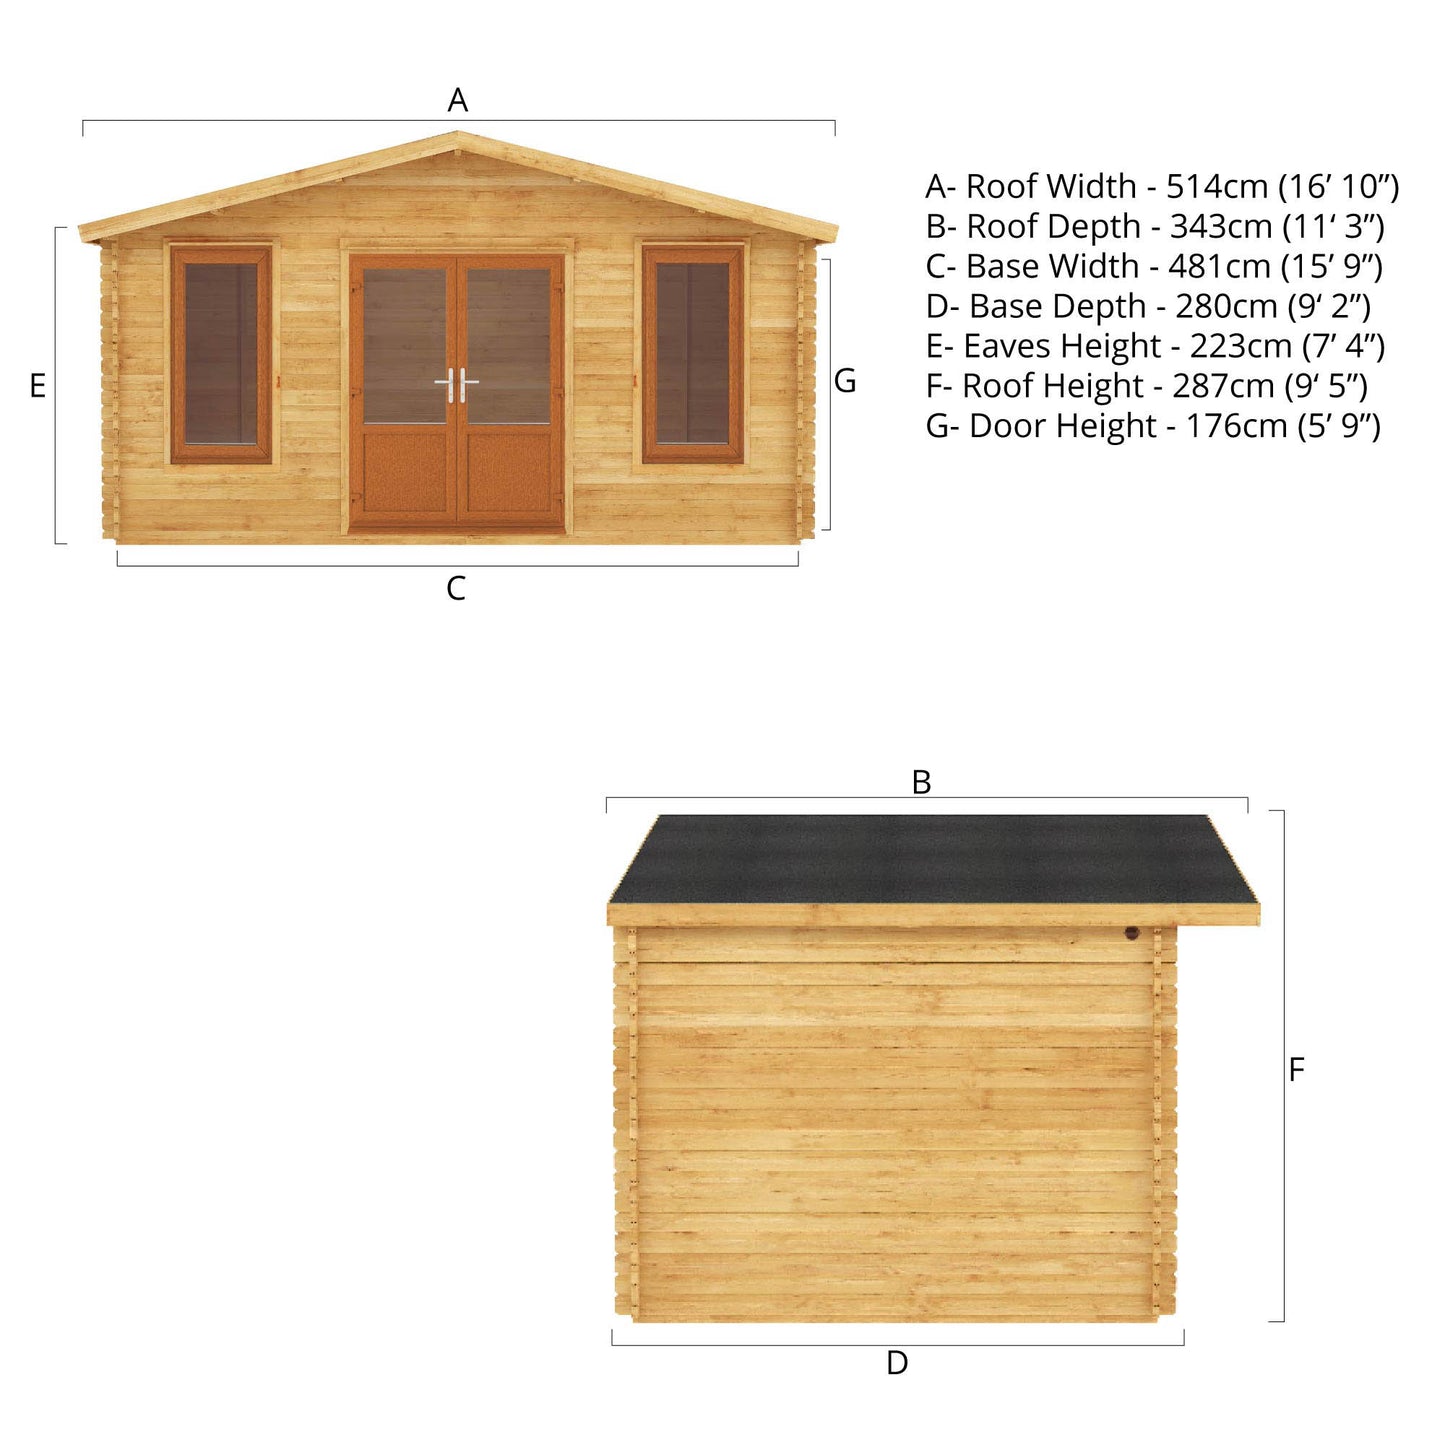 The 5m x 3m Sparrow Log Cabin with Oak UPVC